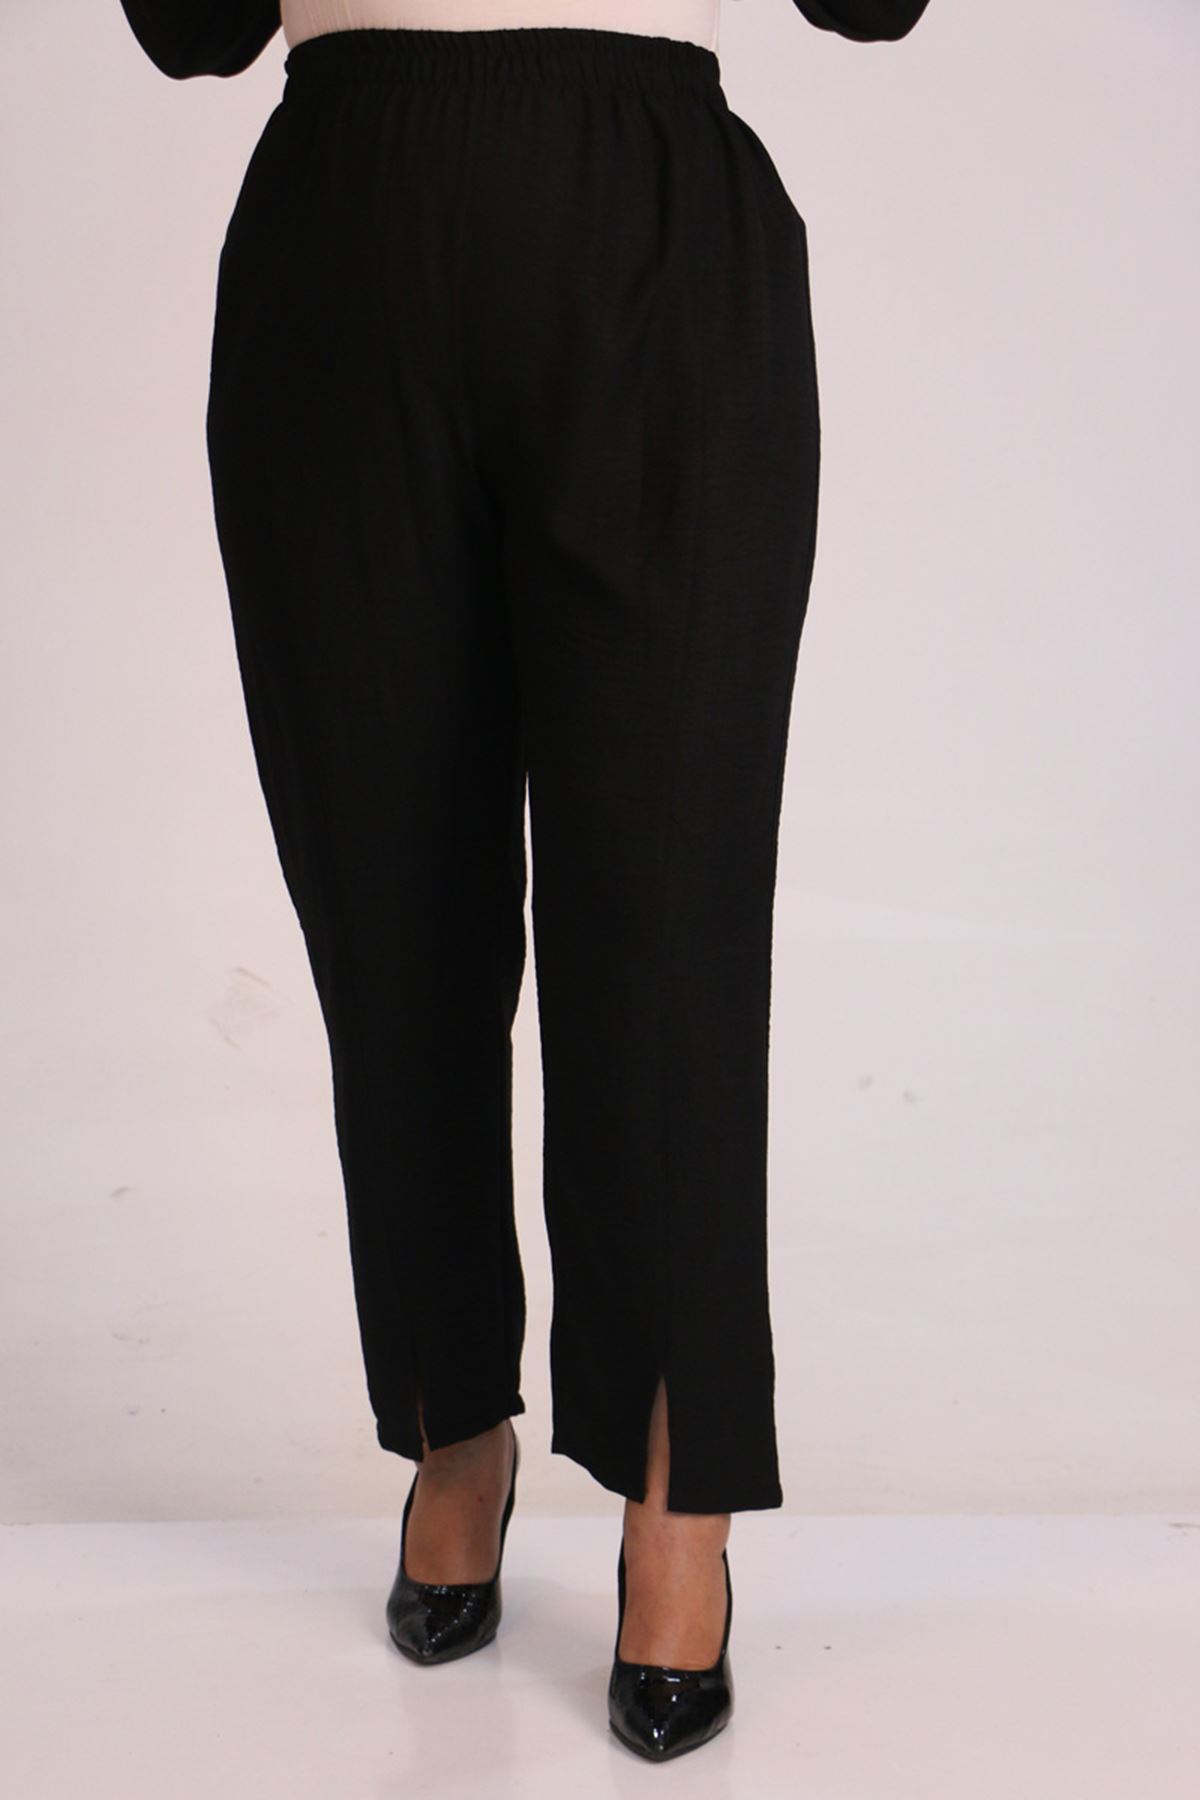 37036 Large Size Linen Airobin Stone Printed Trousers Suit-Black